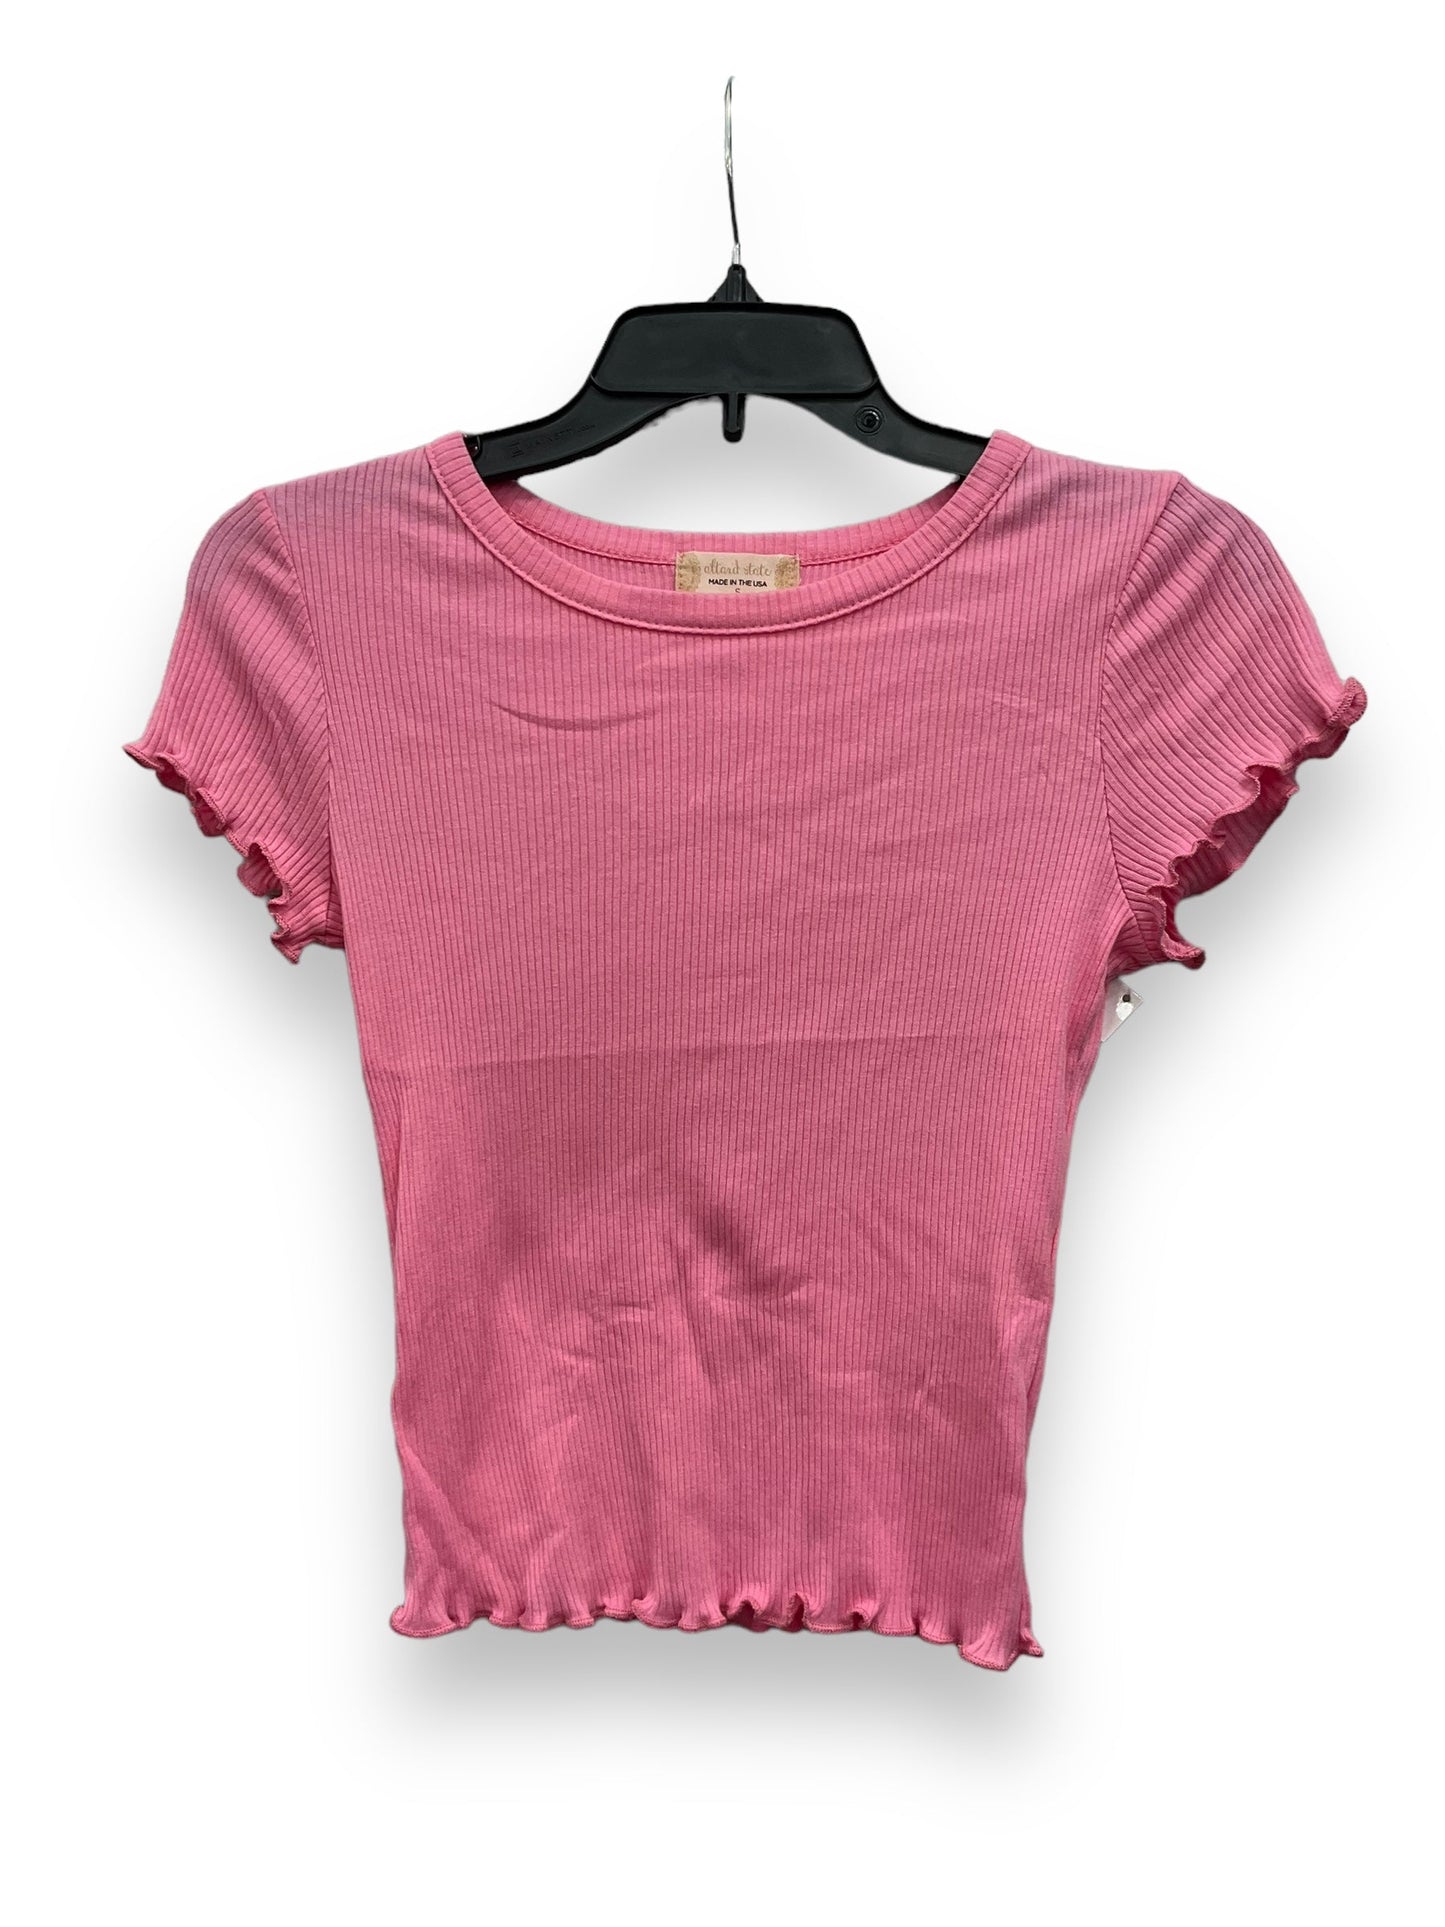 Pink Top Short Sleeve Basic Altard State, Size S